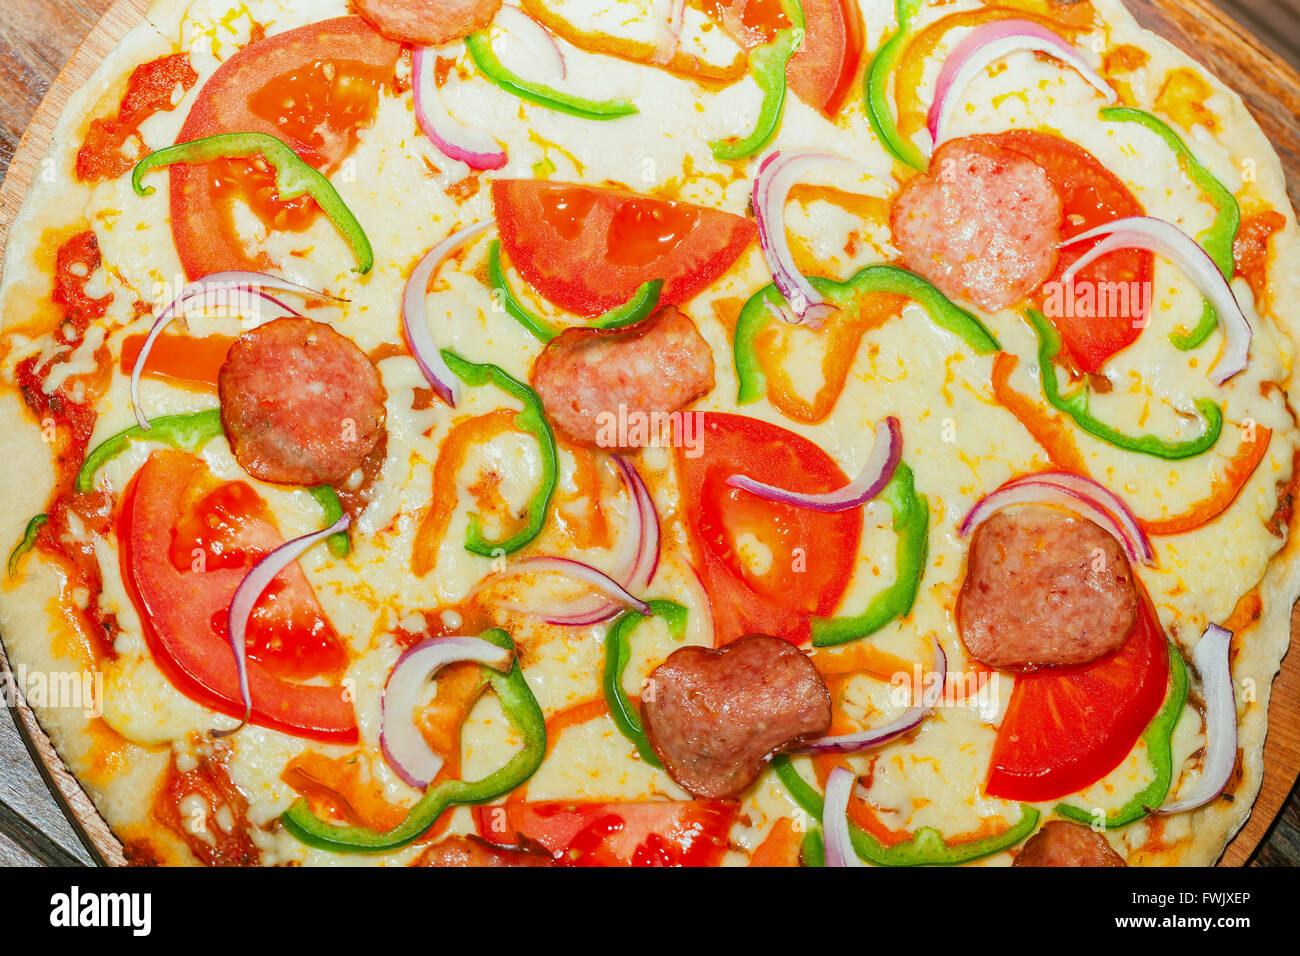 Pizza Comes From Italy, From Neapolitan Cuisine, But Has Become Popular In Many Parts Of The World Stock Photo